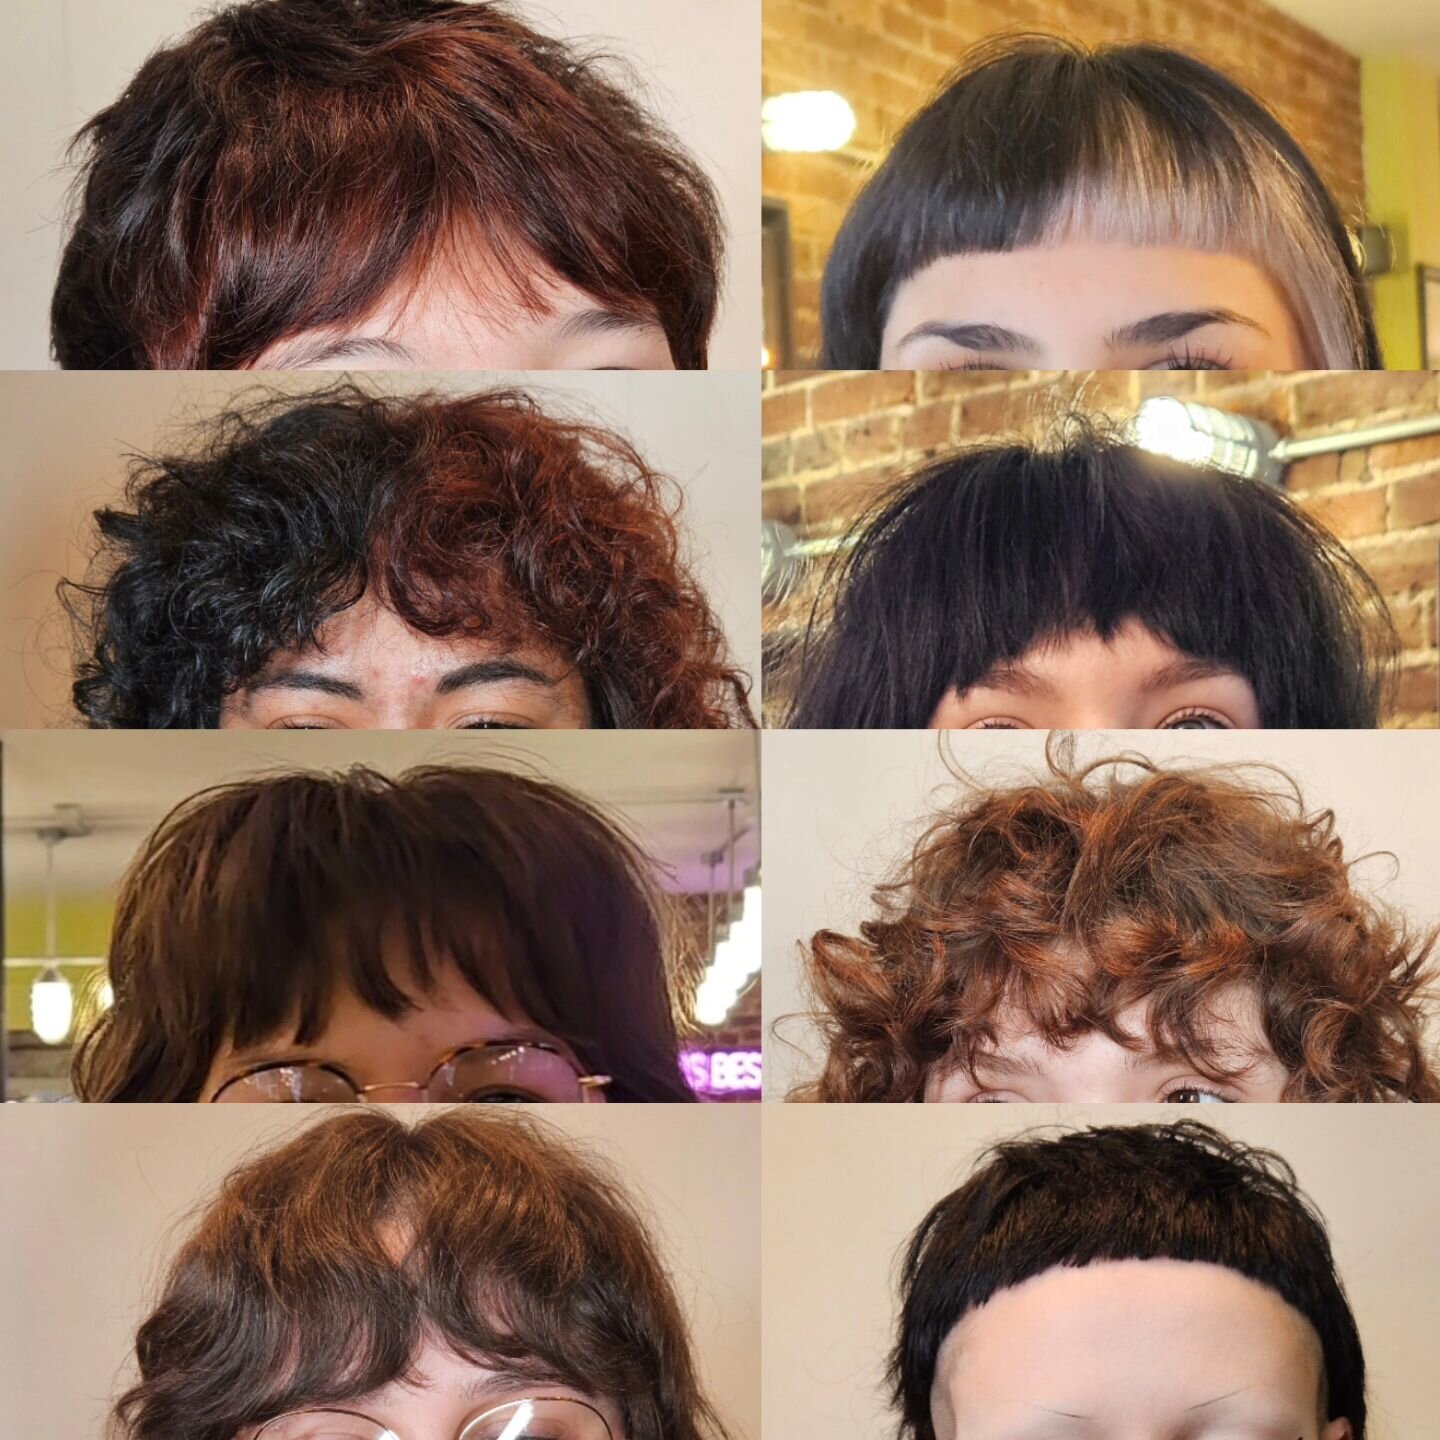 I love a good variety, especially when that variety is fringe. Curly, blunt, straight, micro, bang, bang! 

#lexingtonkysalon #lexingtonkyhairstylist #lgbtqhairstylist #transhairstylist #bangs #fringe #curlybangs #microbangs